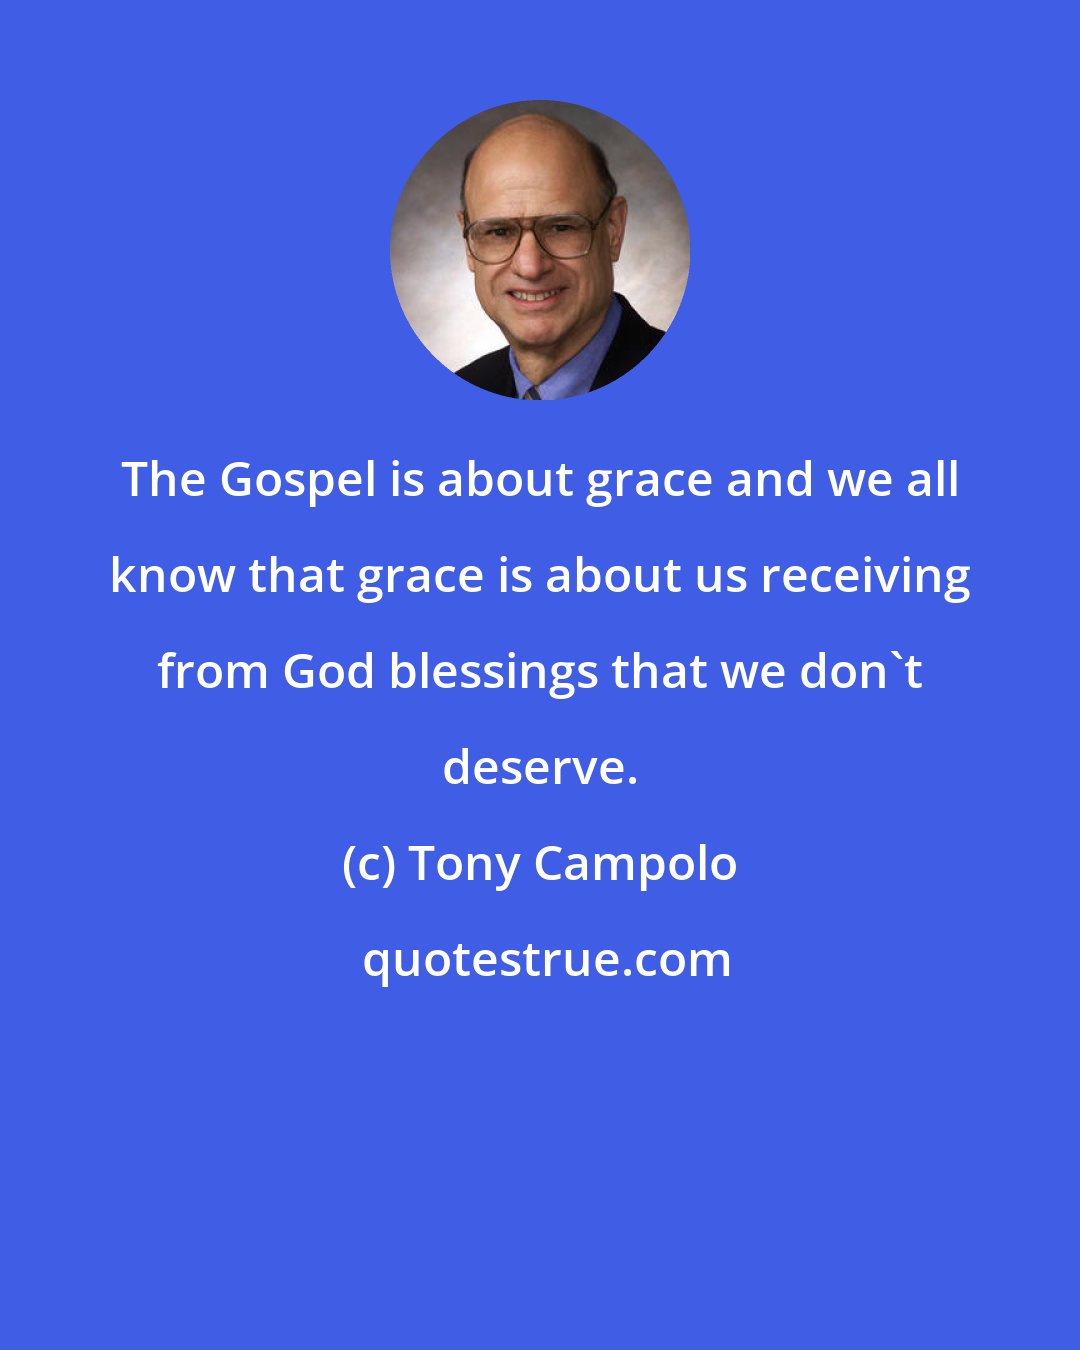 Tony Campolo: The Gospel is about grace and we all know that grace is about us receiving from God blessings that we don't deserve.